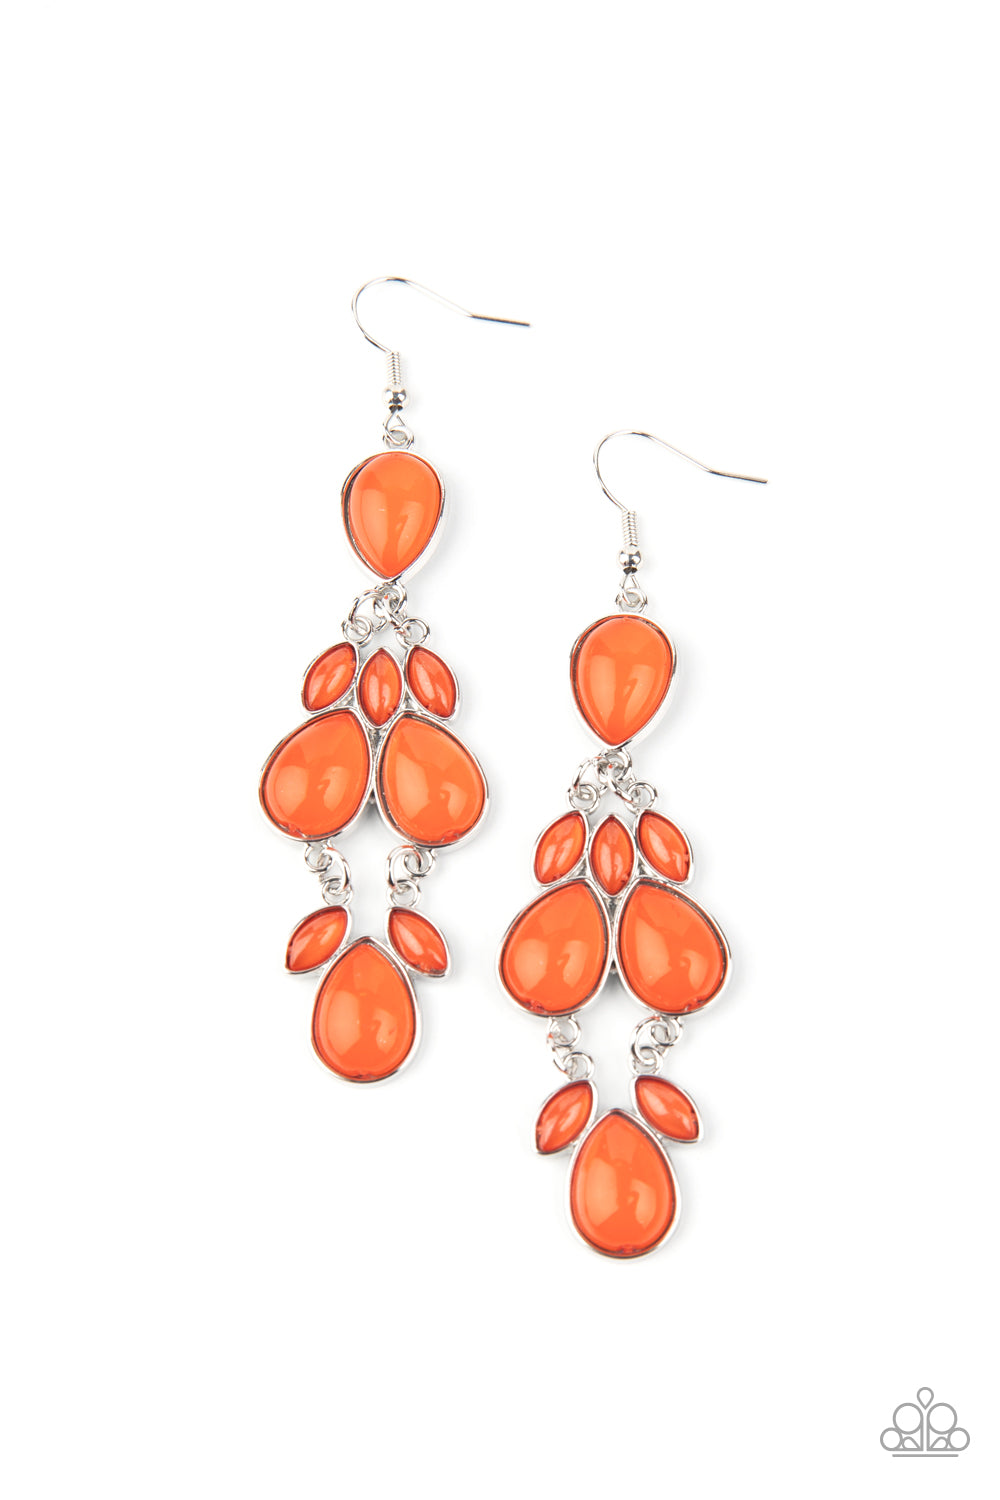 Paparazzi Accessories Superstar Social - Orange Earrings - Lady T Accessories